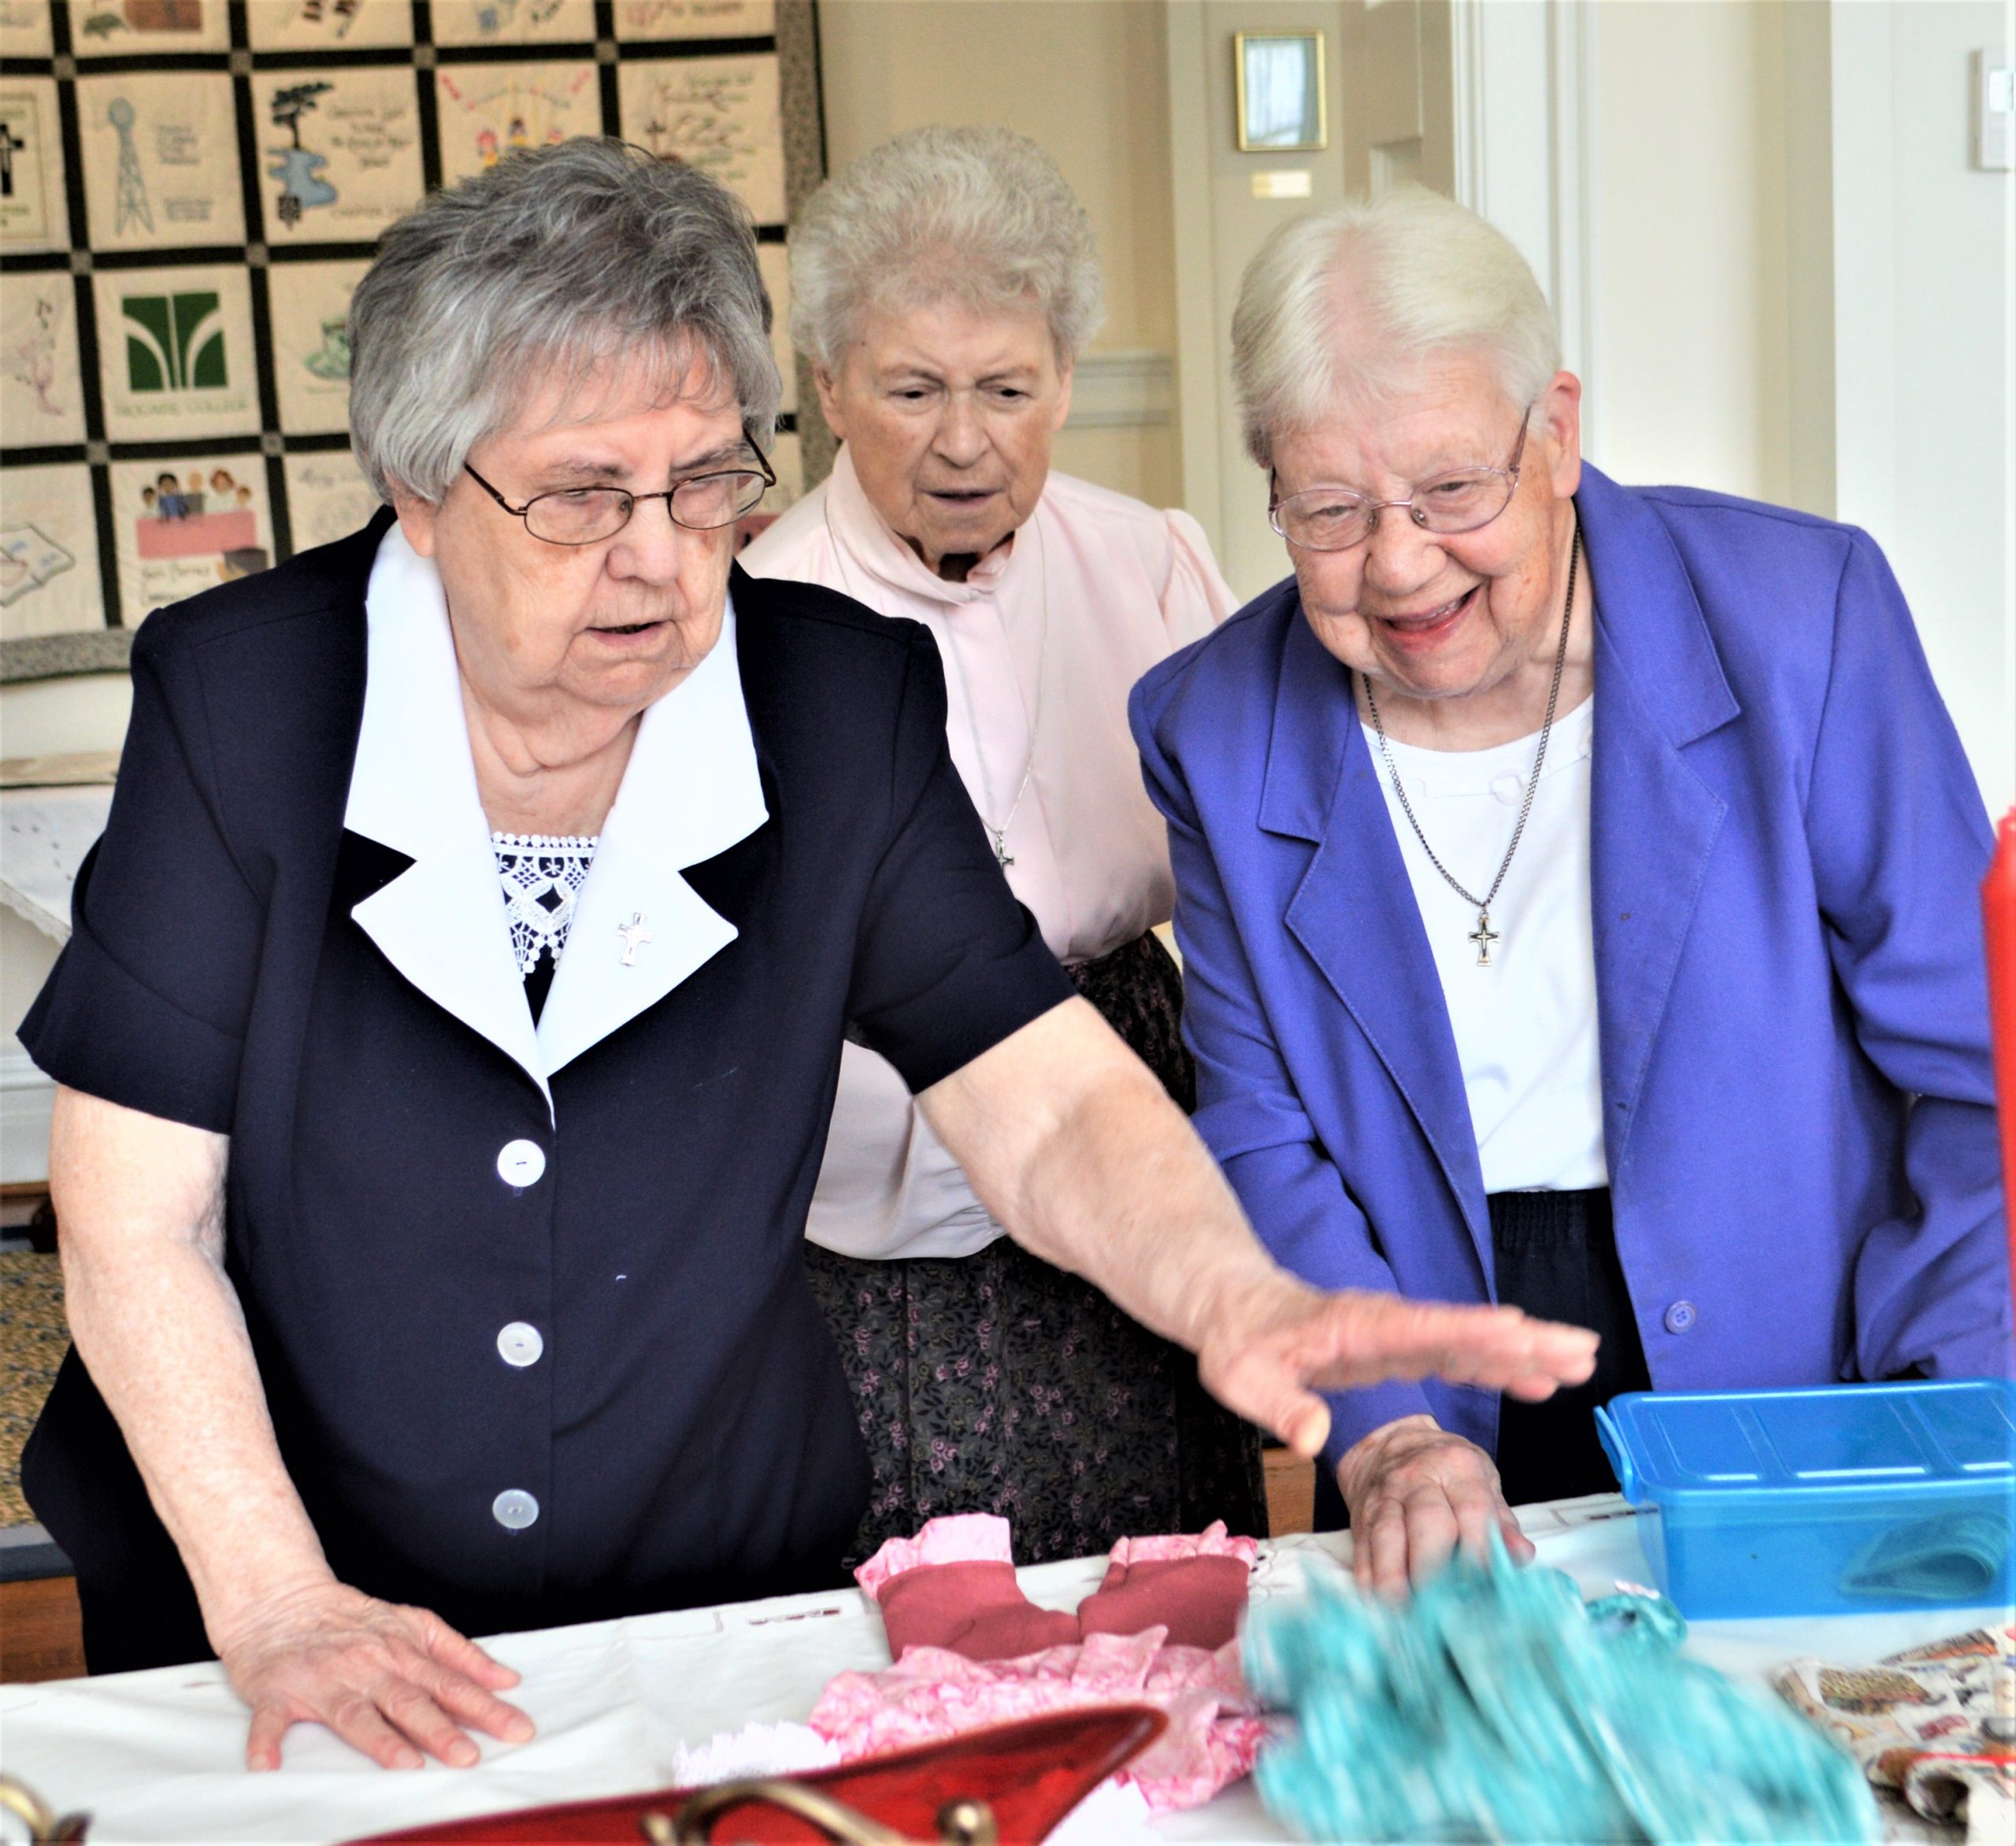 Sister Bernadette Geiser, left, shows Sisters Mary Priscilla Faltisko, center, and M. Norine Truax items to be raffled. Proceeds from the project are going to benefit migrants at the U.S. border with Mexico.